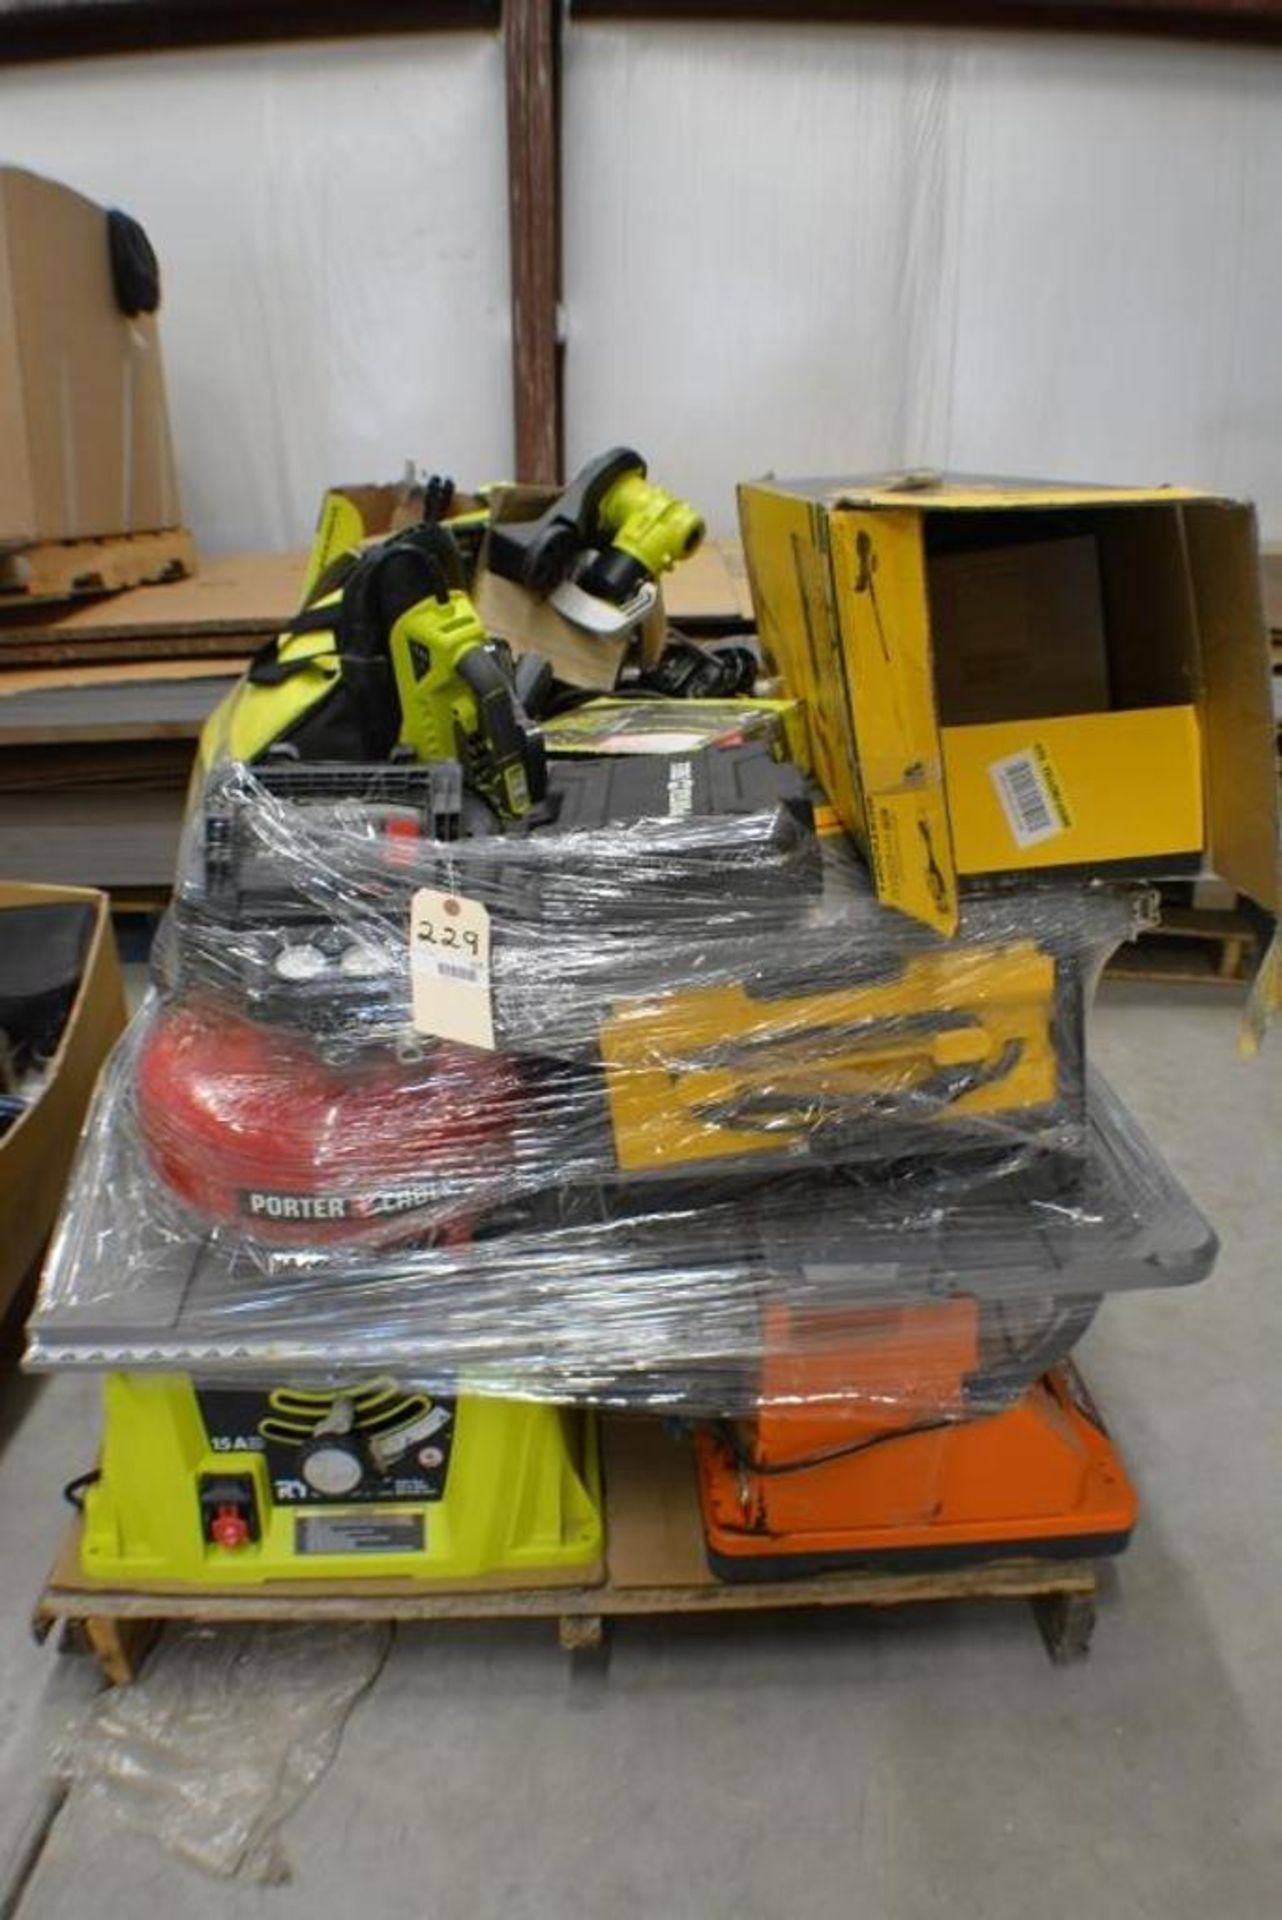 Tools by Assorted Brands. Dewalt + Porter Cable + Ridgid + Ryobi. Assorted Tools. Contents of Pallet